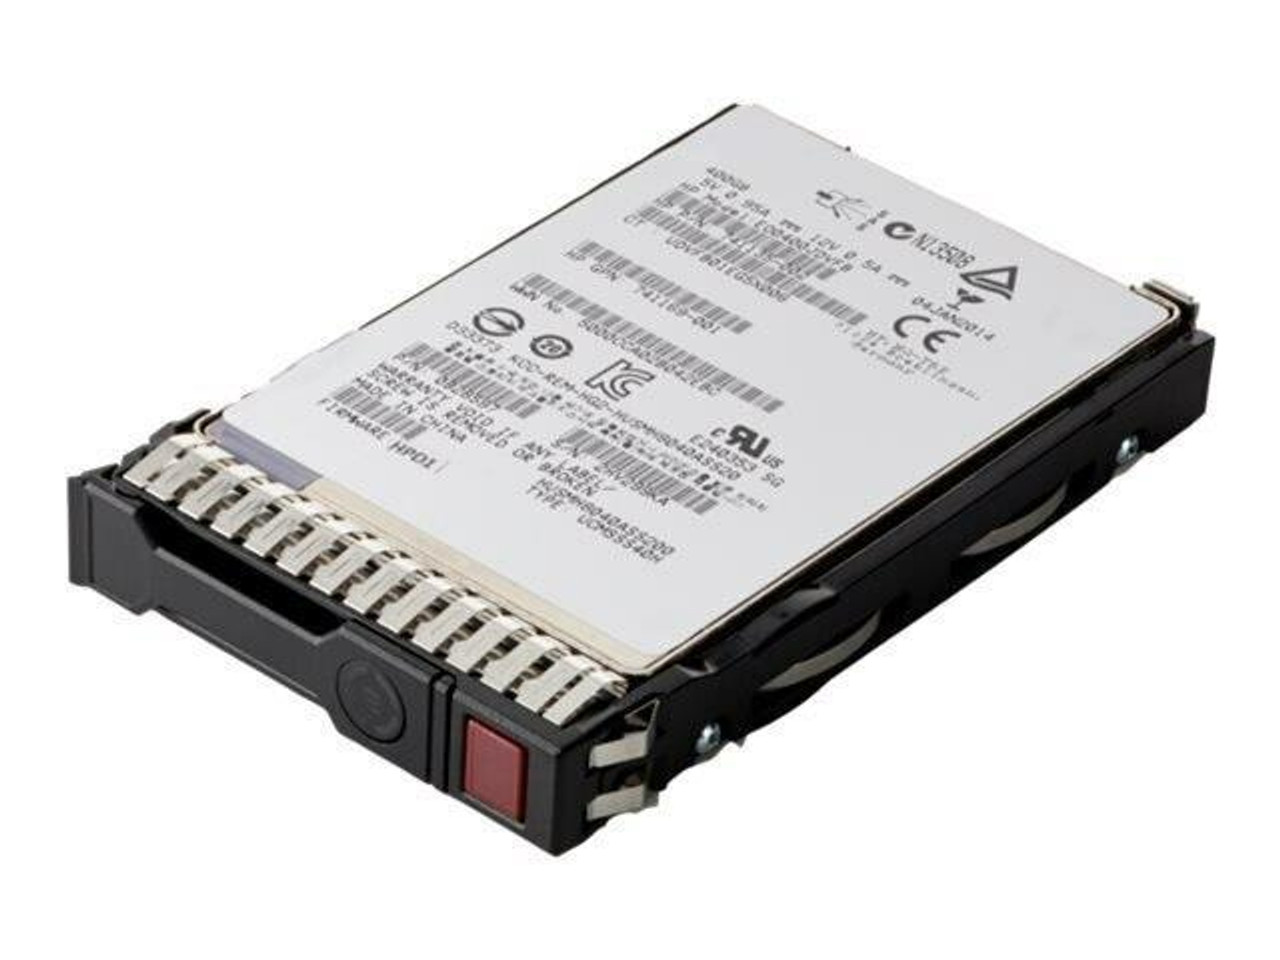 P26285-K21 HPE 960GB SAS 12Gbps Read Intensive 2.5-inch Internal Solid State Drive (SSD)